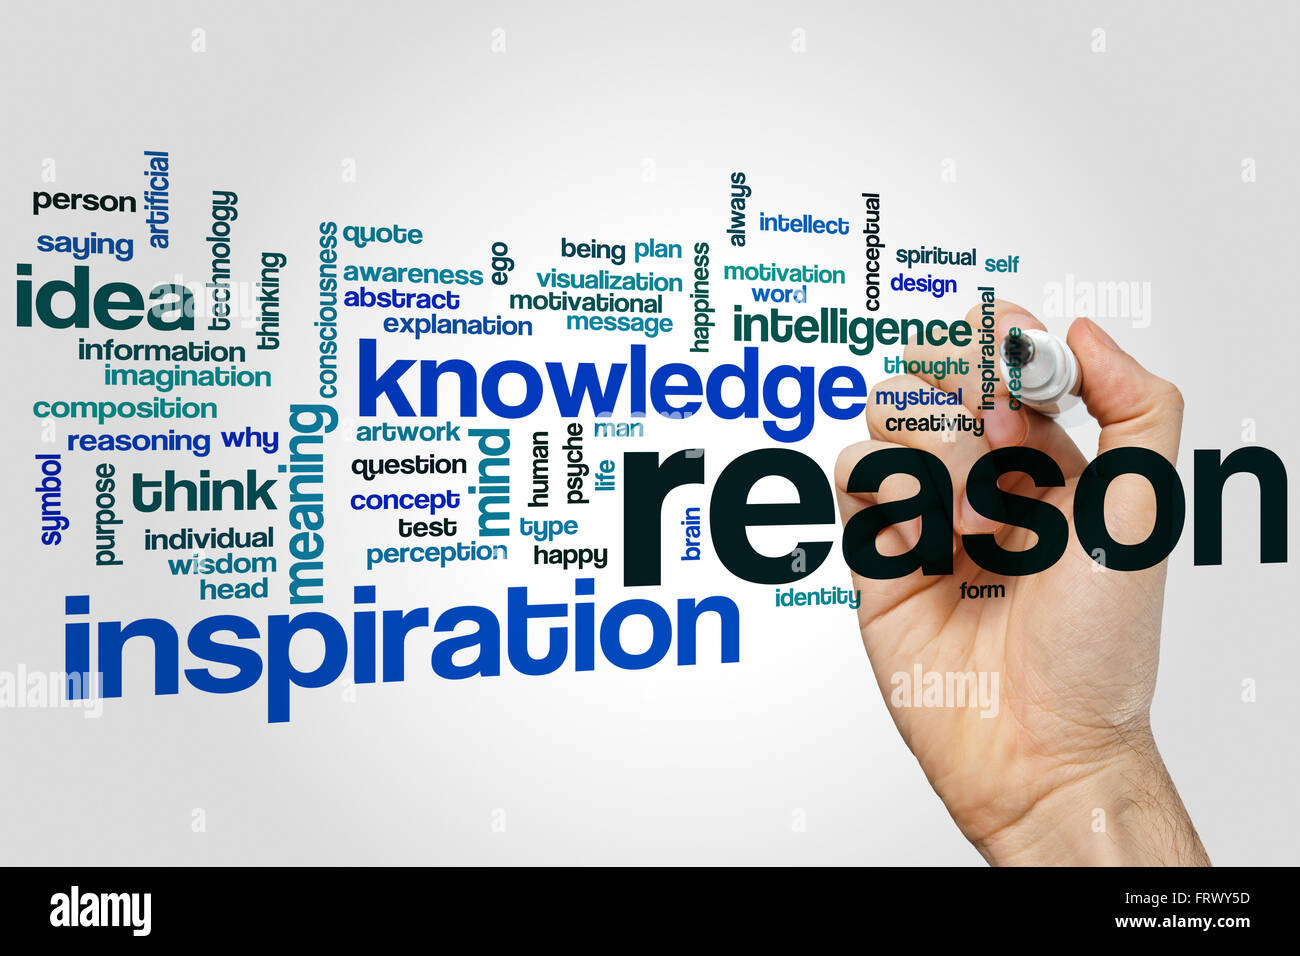 Reason word cloud concept with knowledge idea related tags Stock Photo